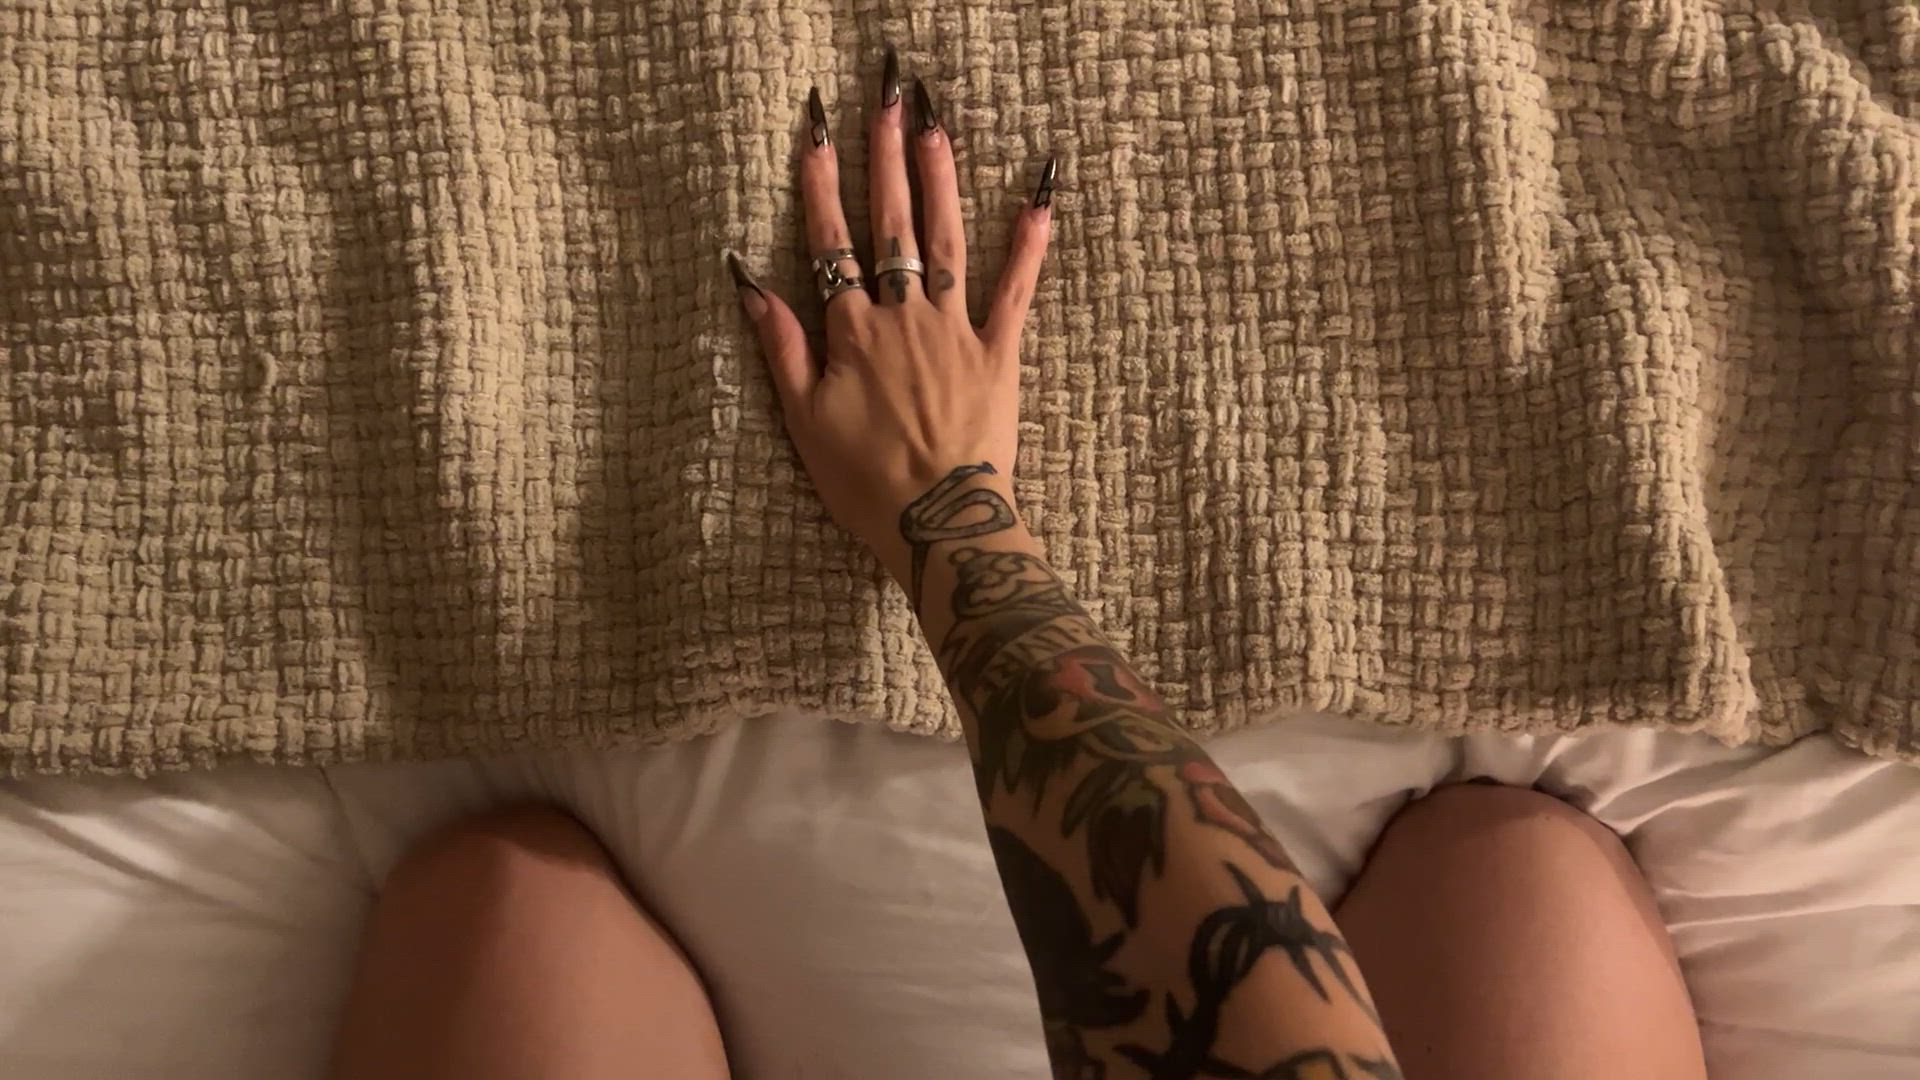 Solo porn video with onlyfans model vexxx444 <strong>@saintservitus</strong>